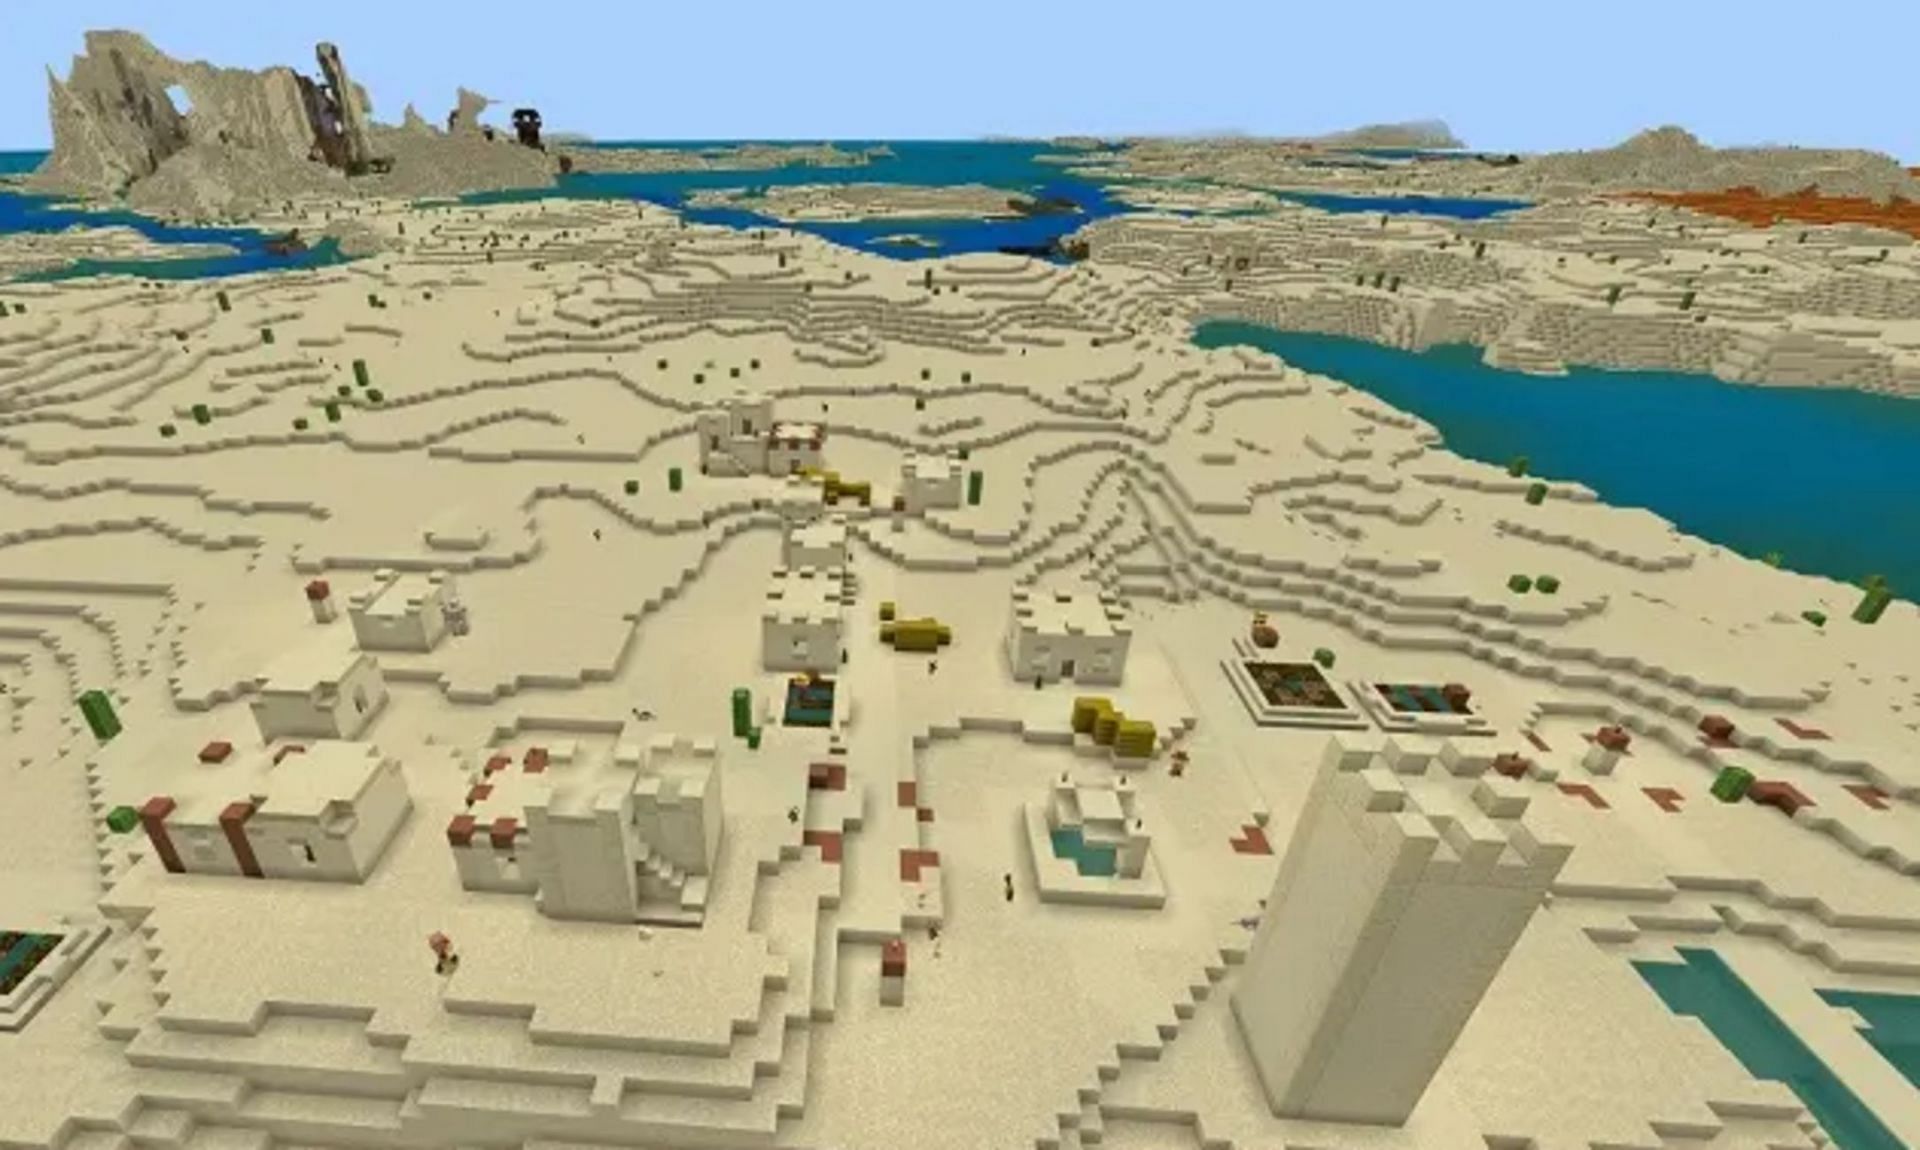 This Minecraft seed might not be too bad for speedrunning practice (Image via Mojang)